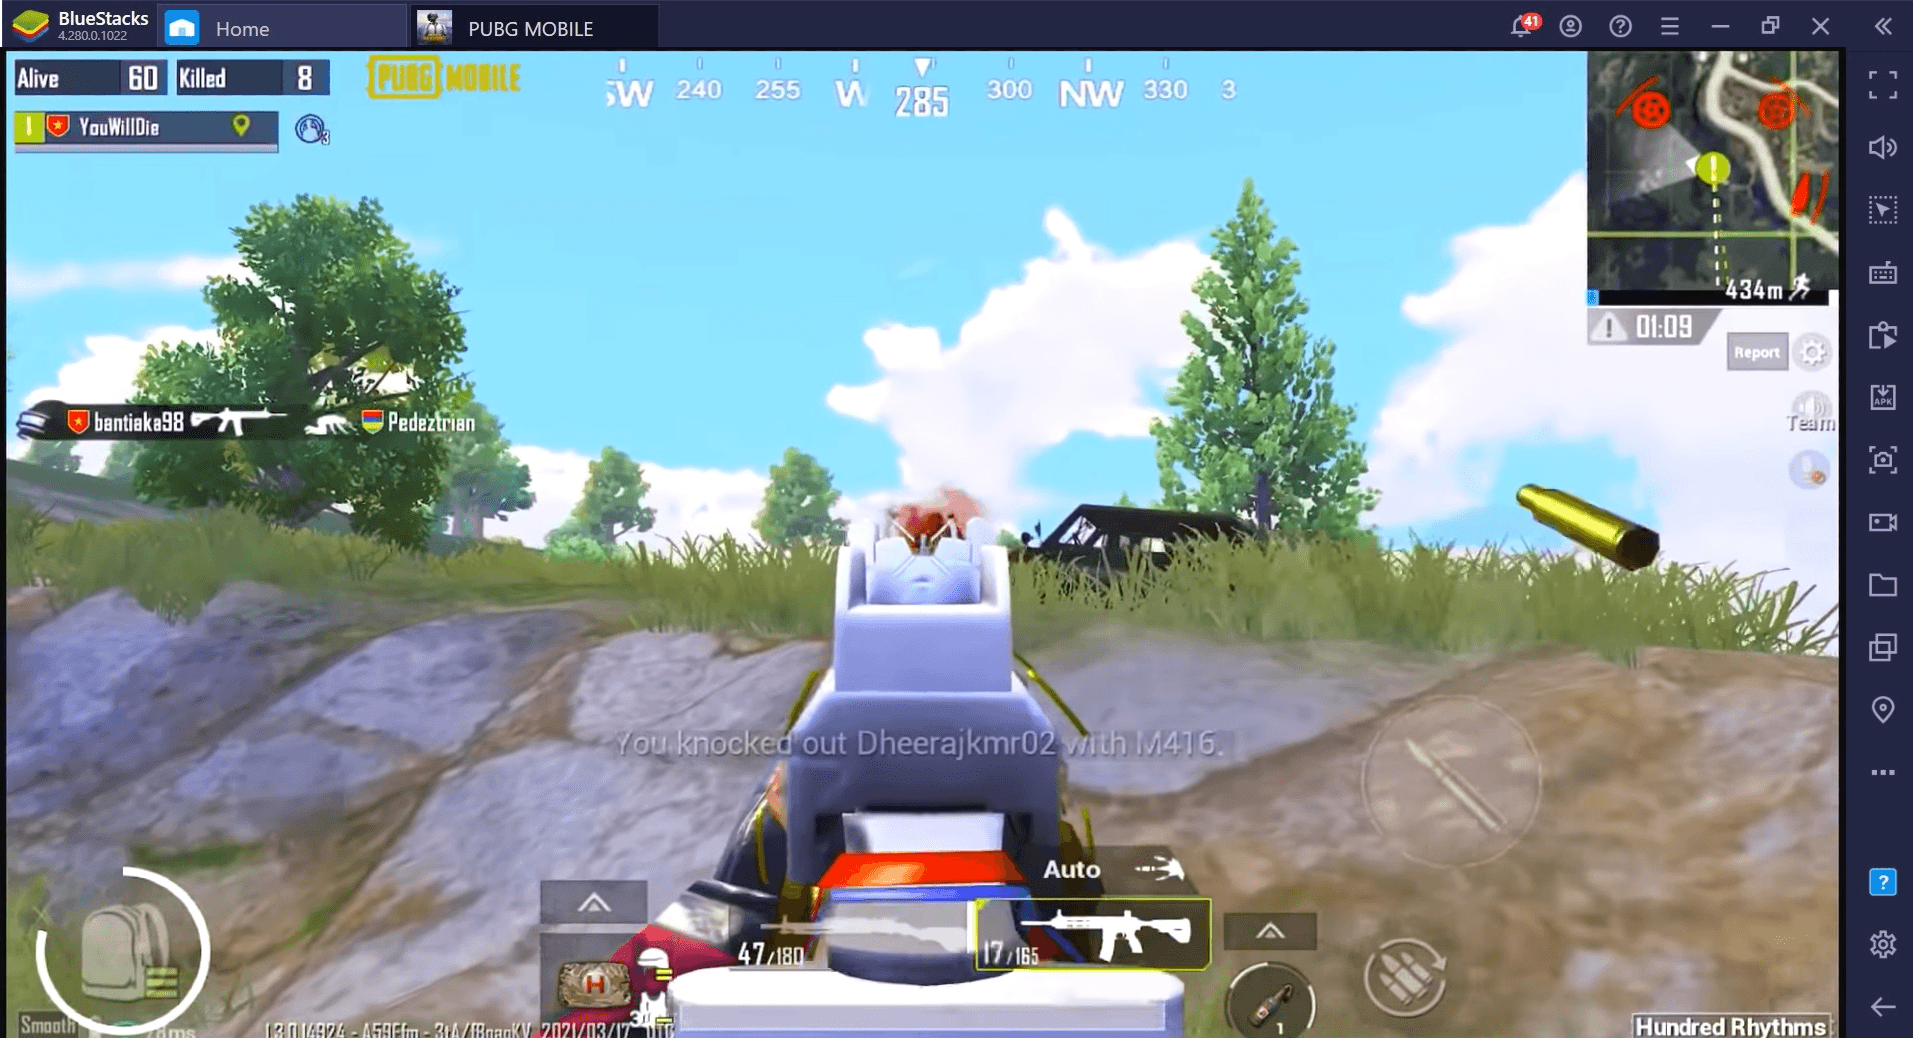 PUBG Mobile Weapon Guide: Top Guns Listed and Compared